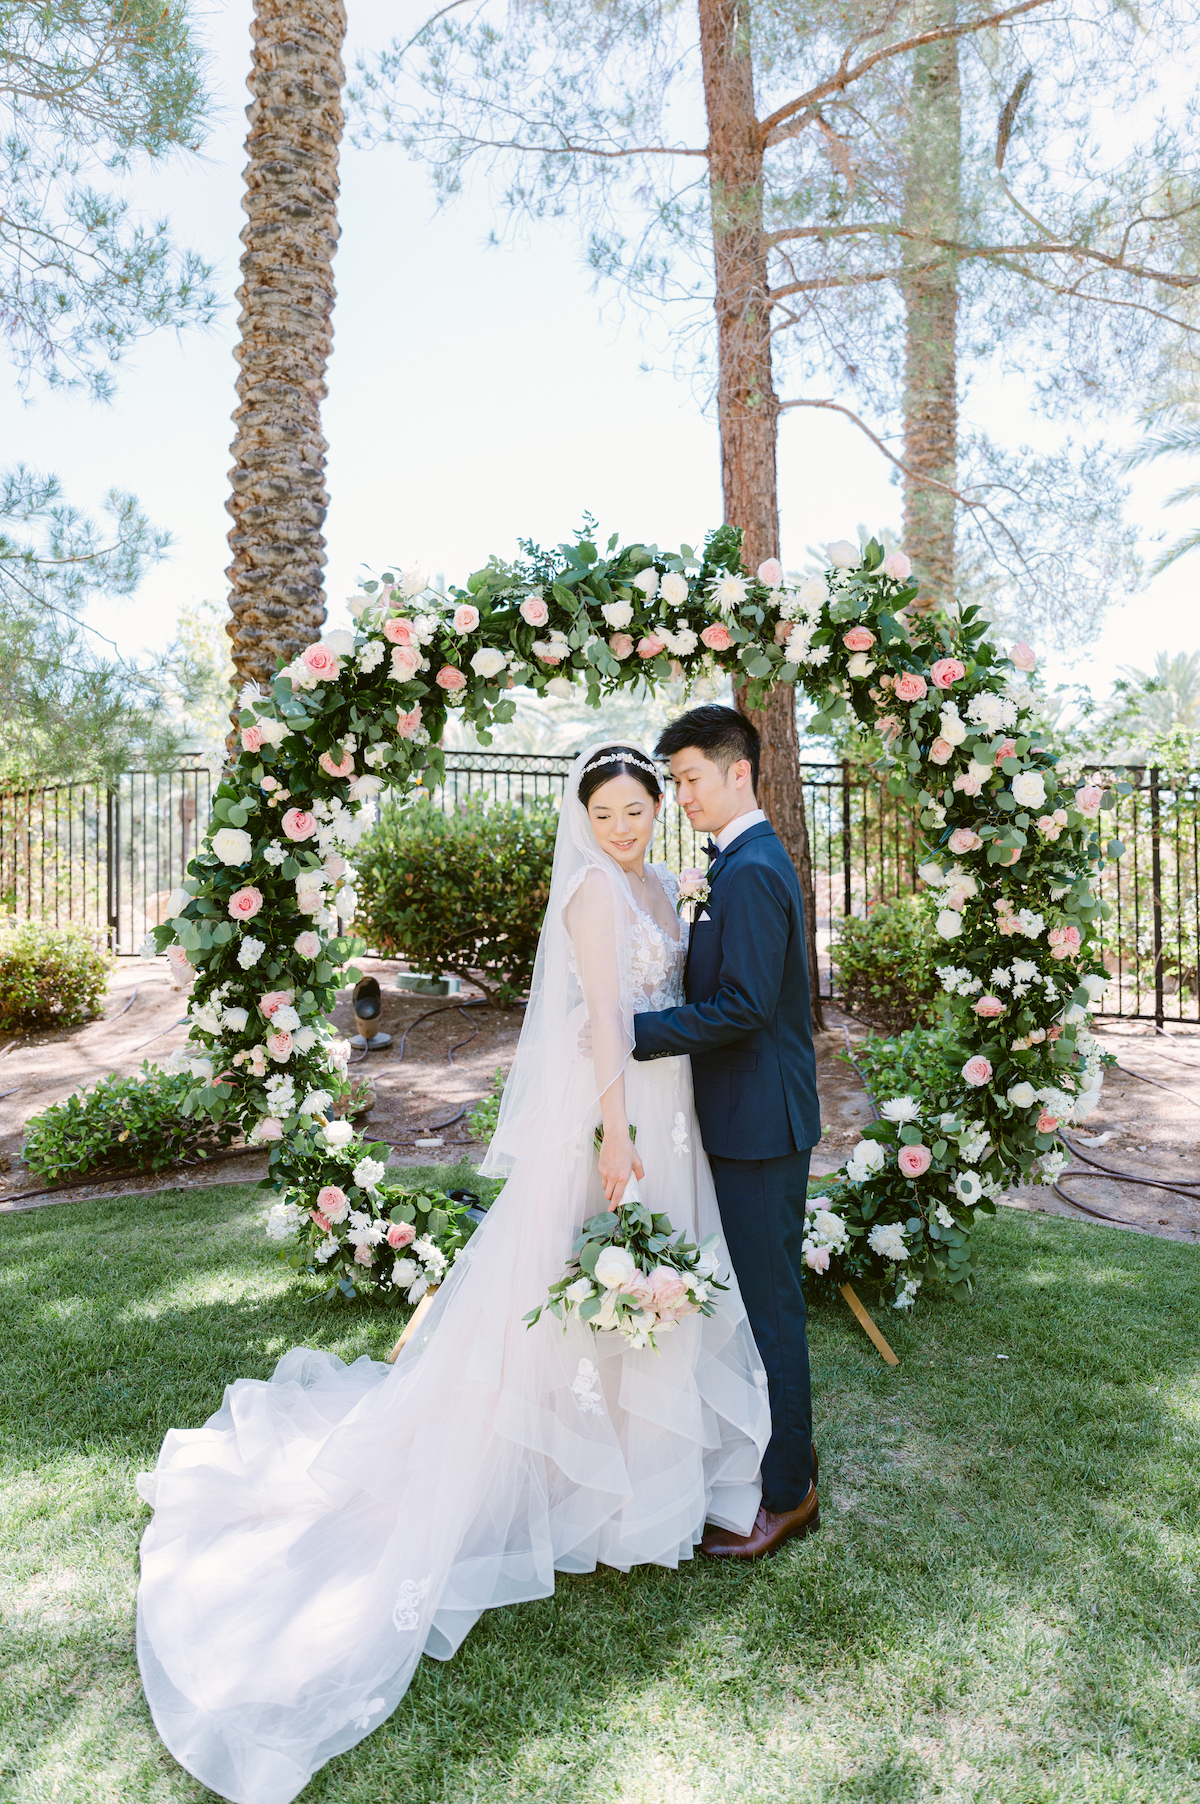 wedding couple embracing with floral arch backdrop at JW Marriott Las Vegas